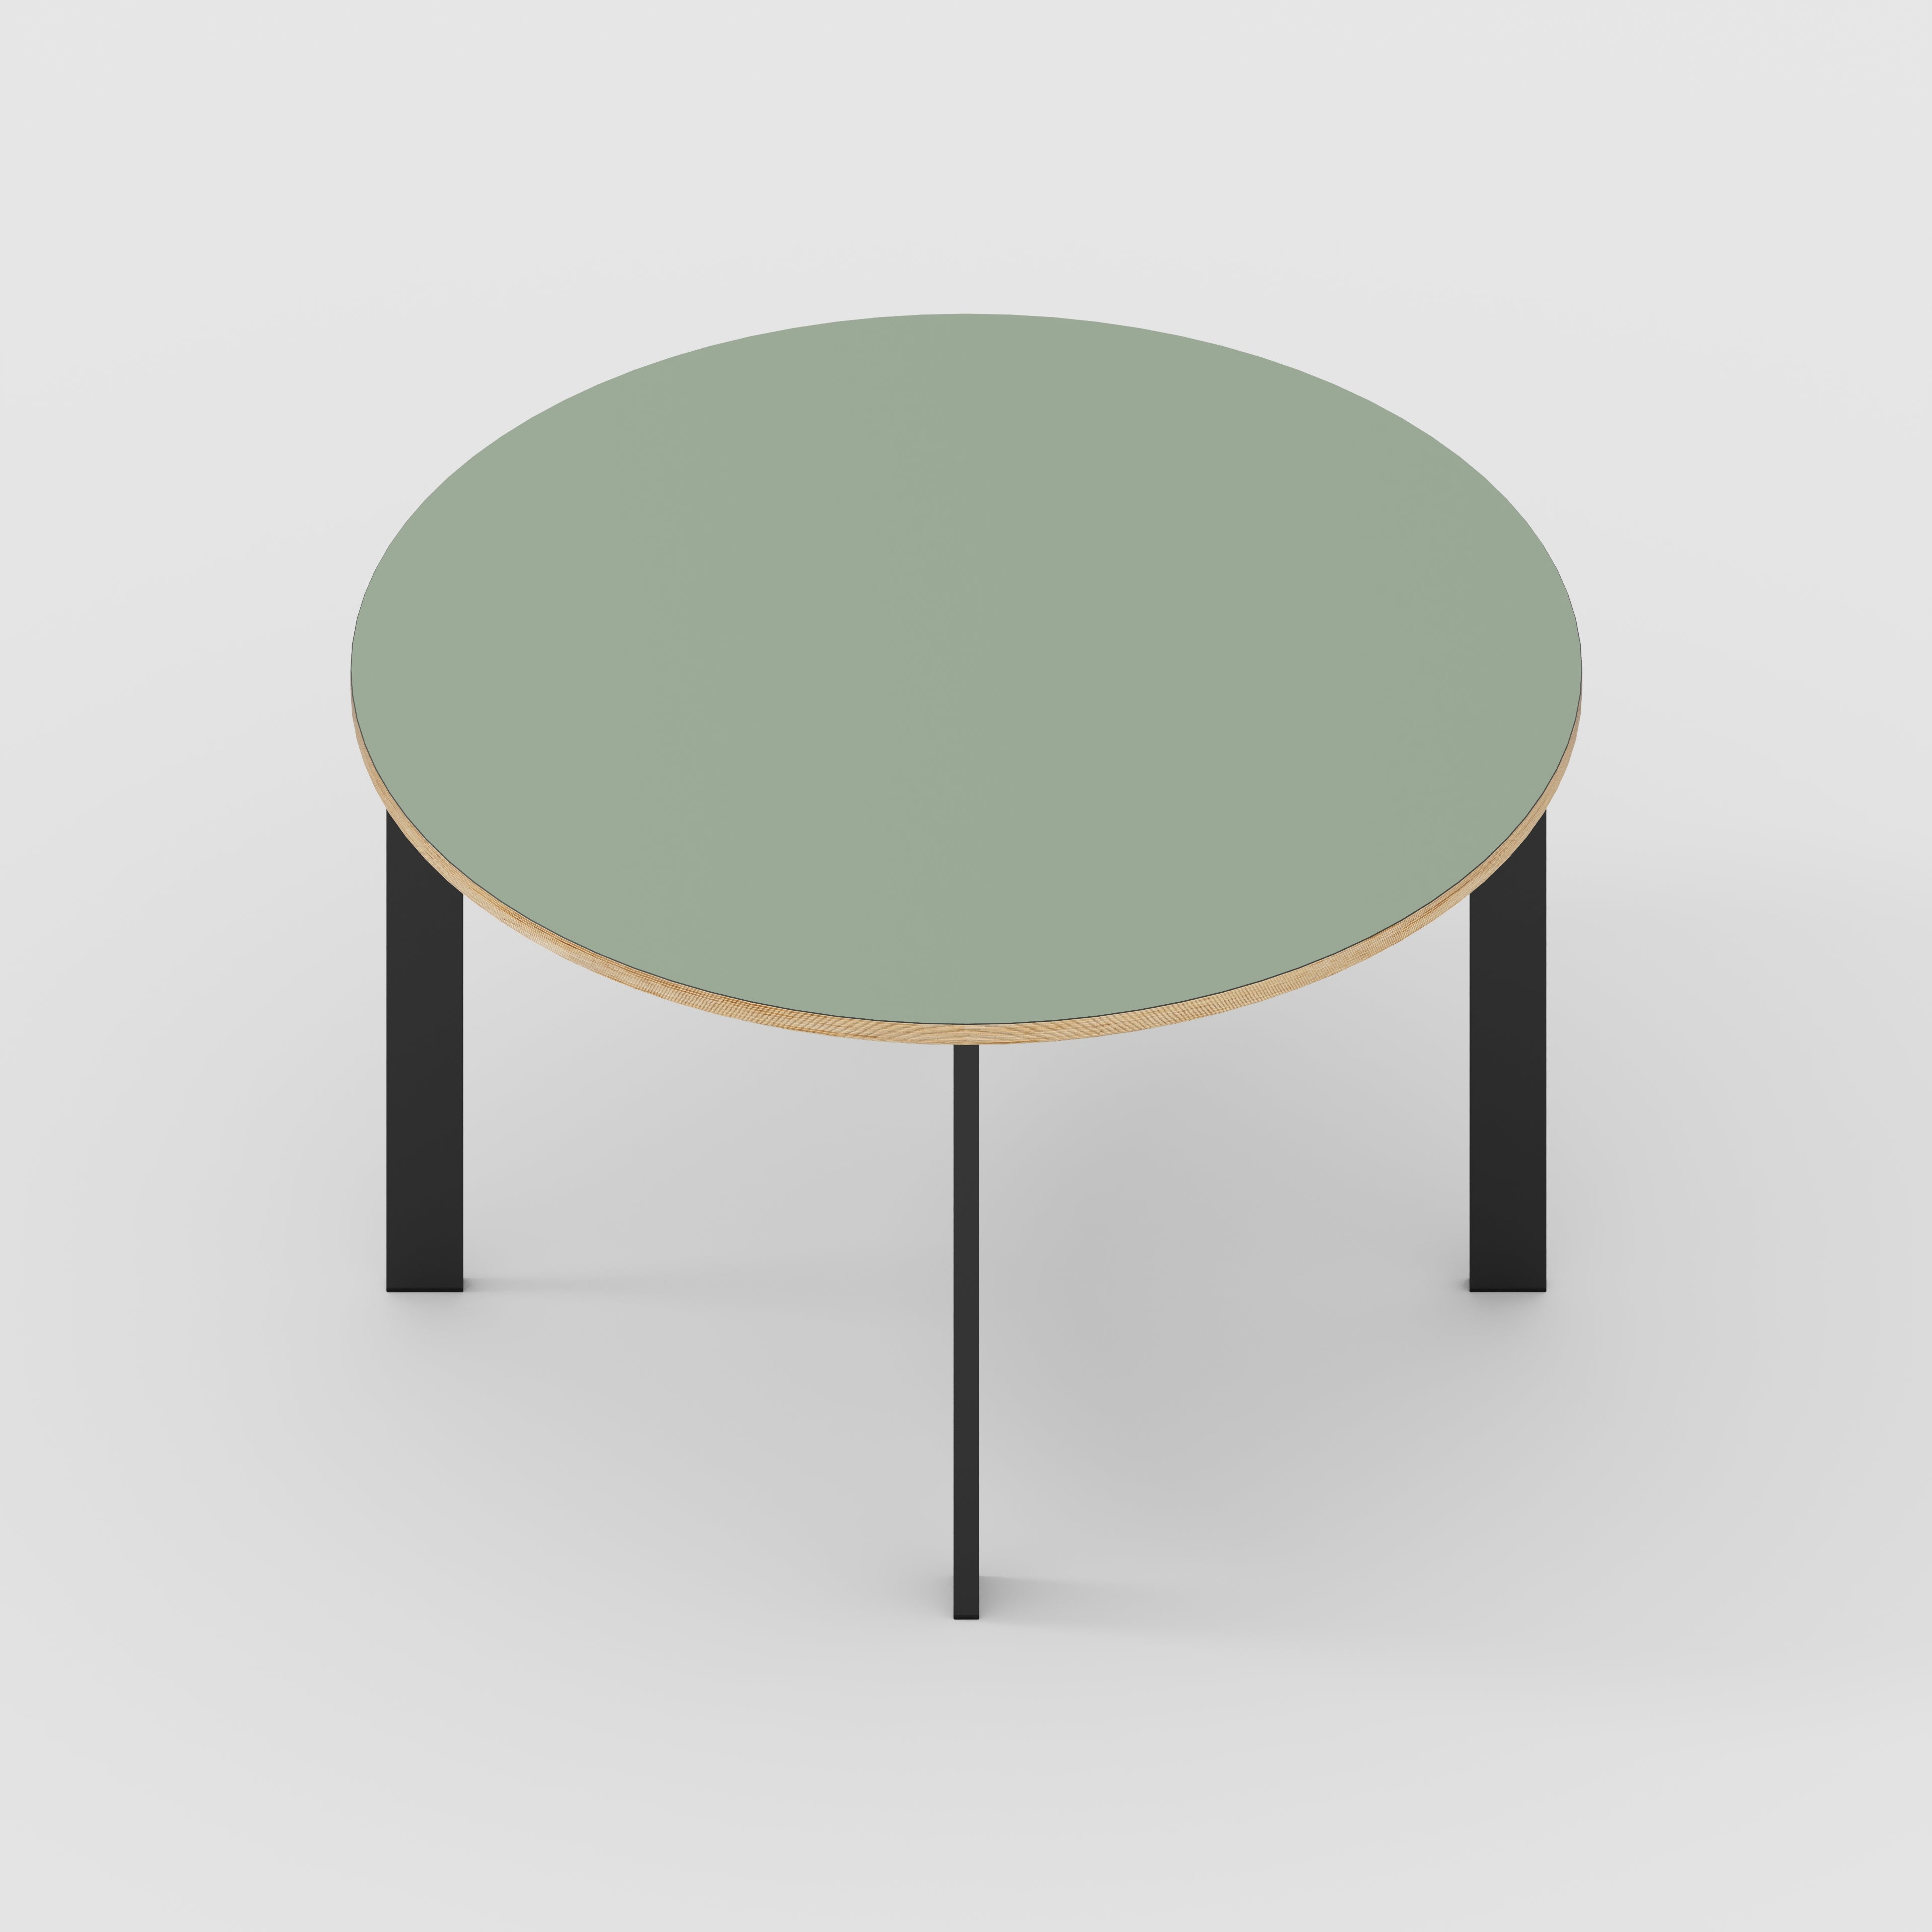 Round Table with Black Rectangular Single Pin Legs - Formica Green Slate - 1200(dia) x 735(h)